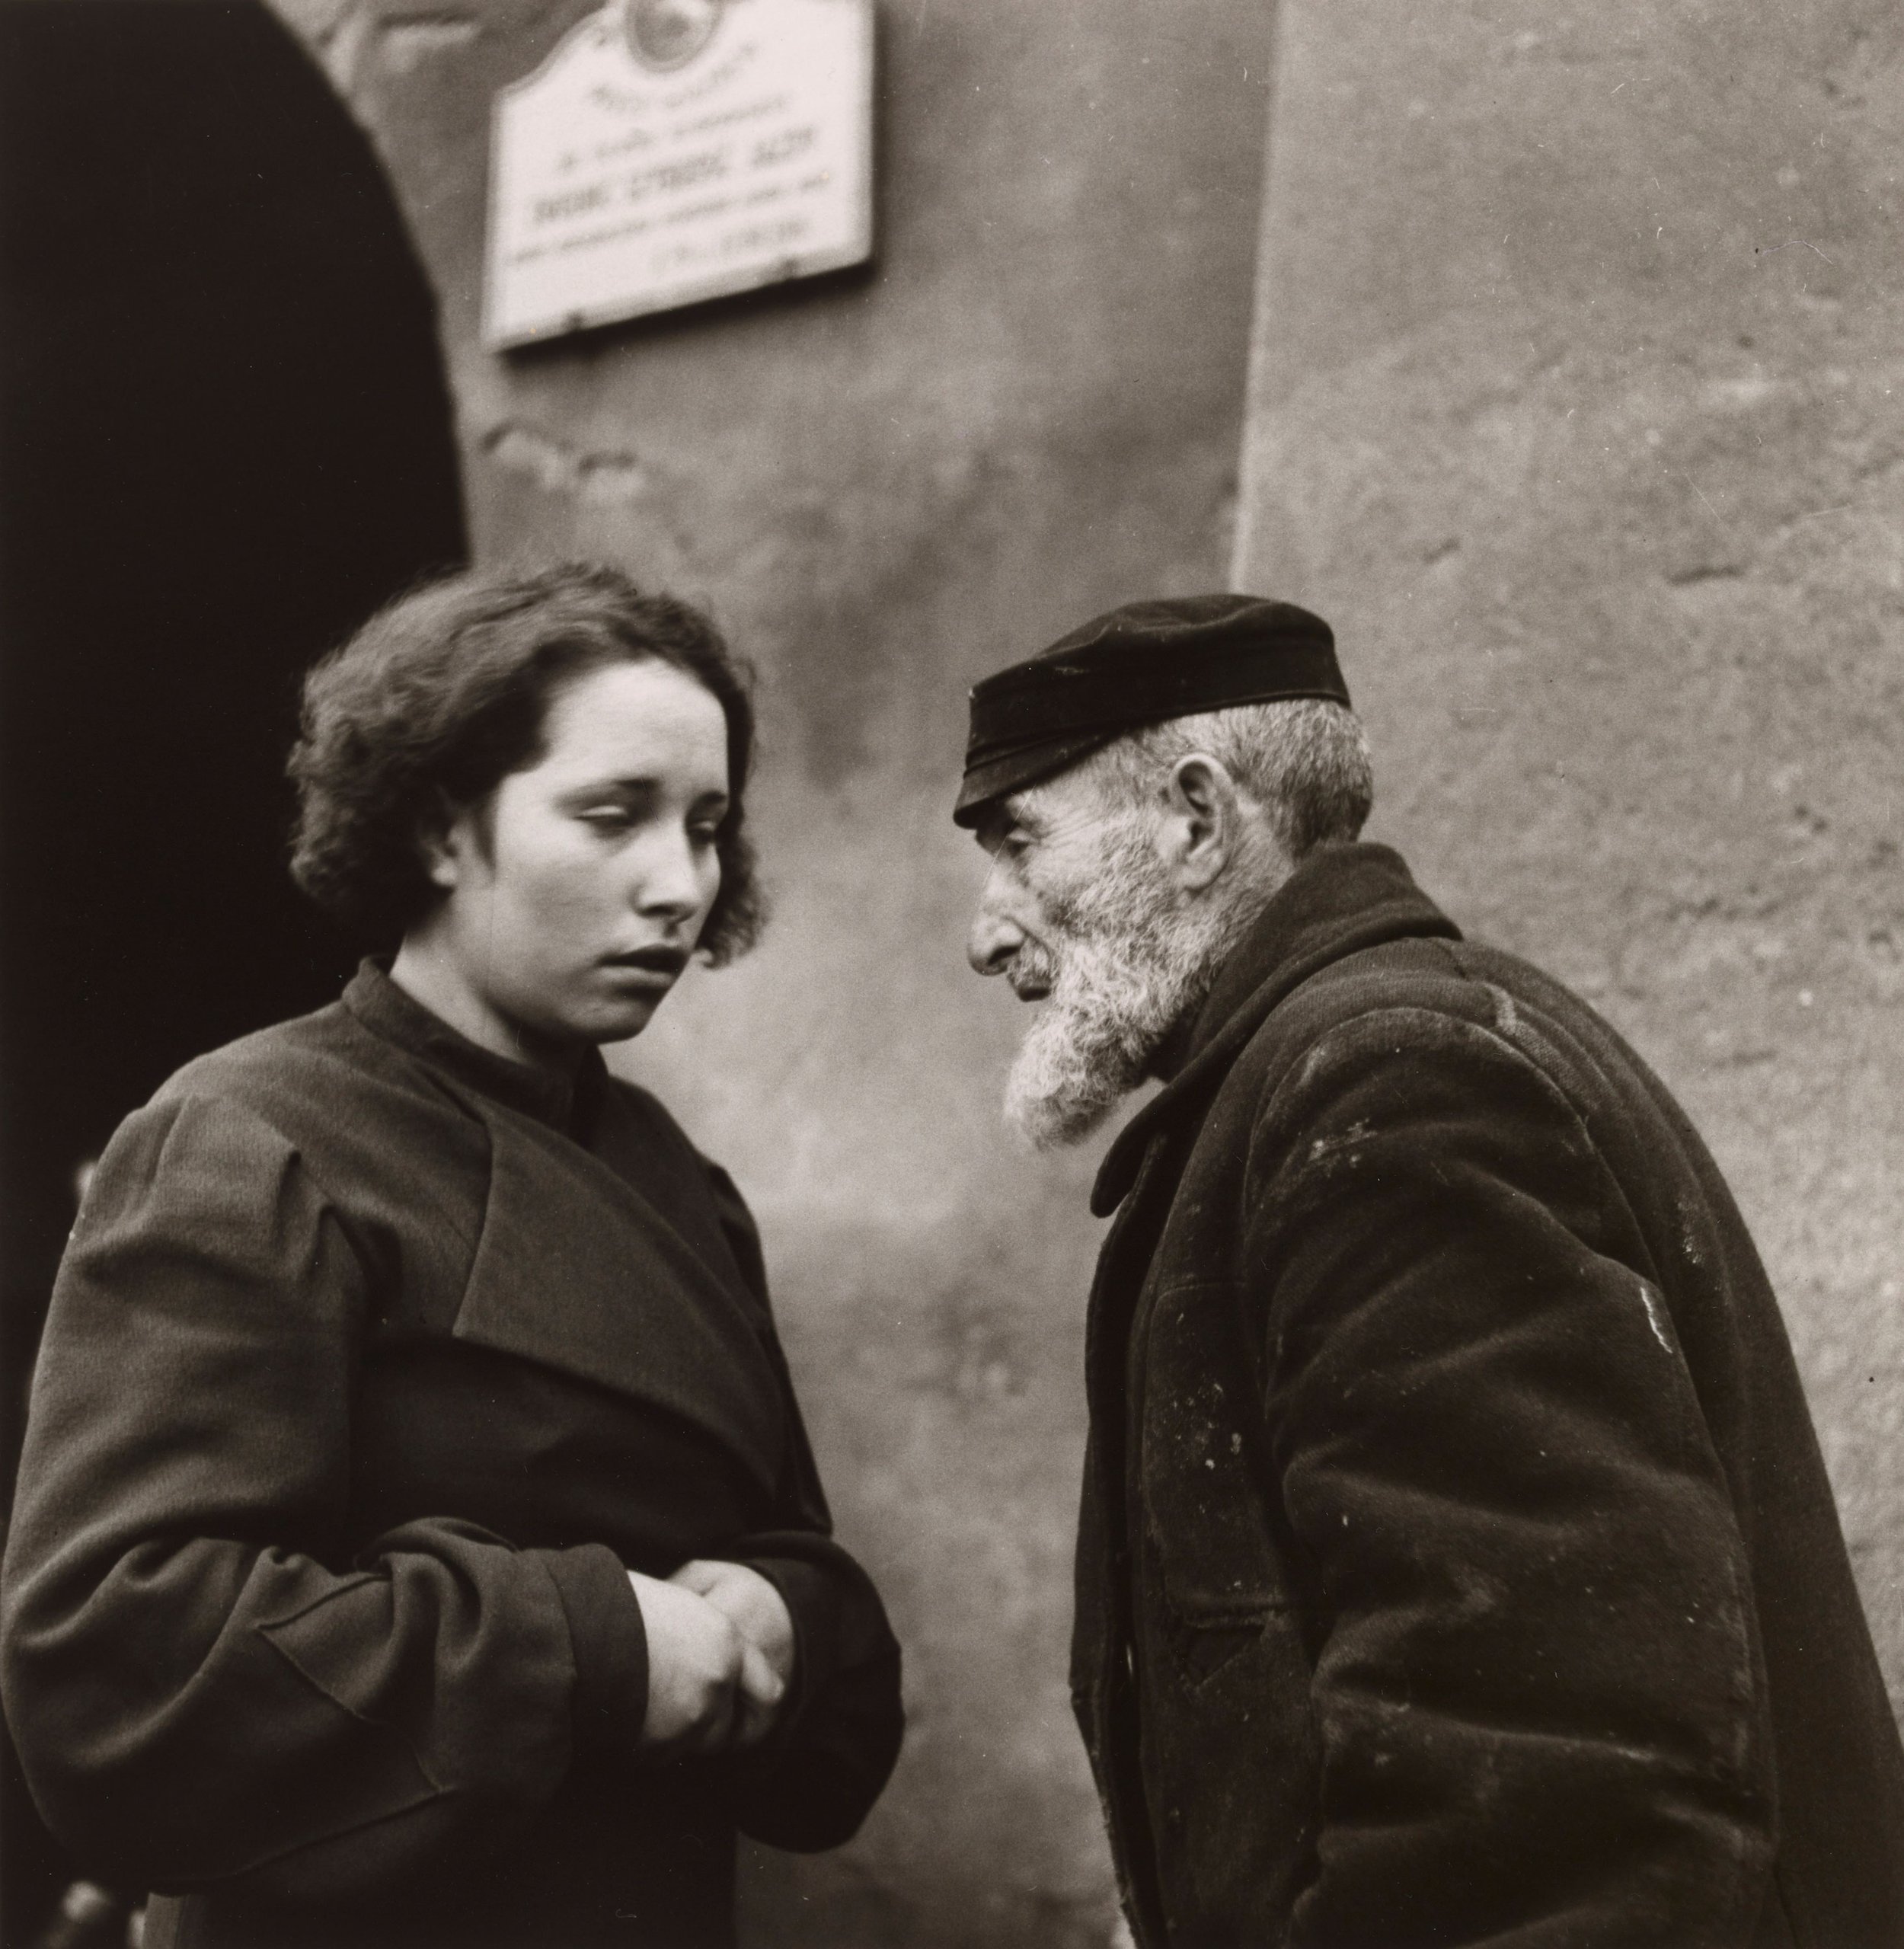  Roman Vishniac (United States, born Russia, 1897–1990),  Granddaughter and Grandfather, Lublin, Poland , 1937, gelatin silver print, 10 5/8 x 10 5/16 inches. Promised Gift from the Judy Glickman Lauder Collection, 1.2000. © The Magnes Collection of 